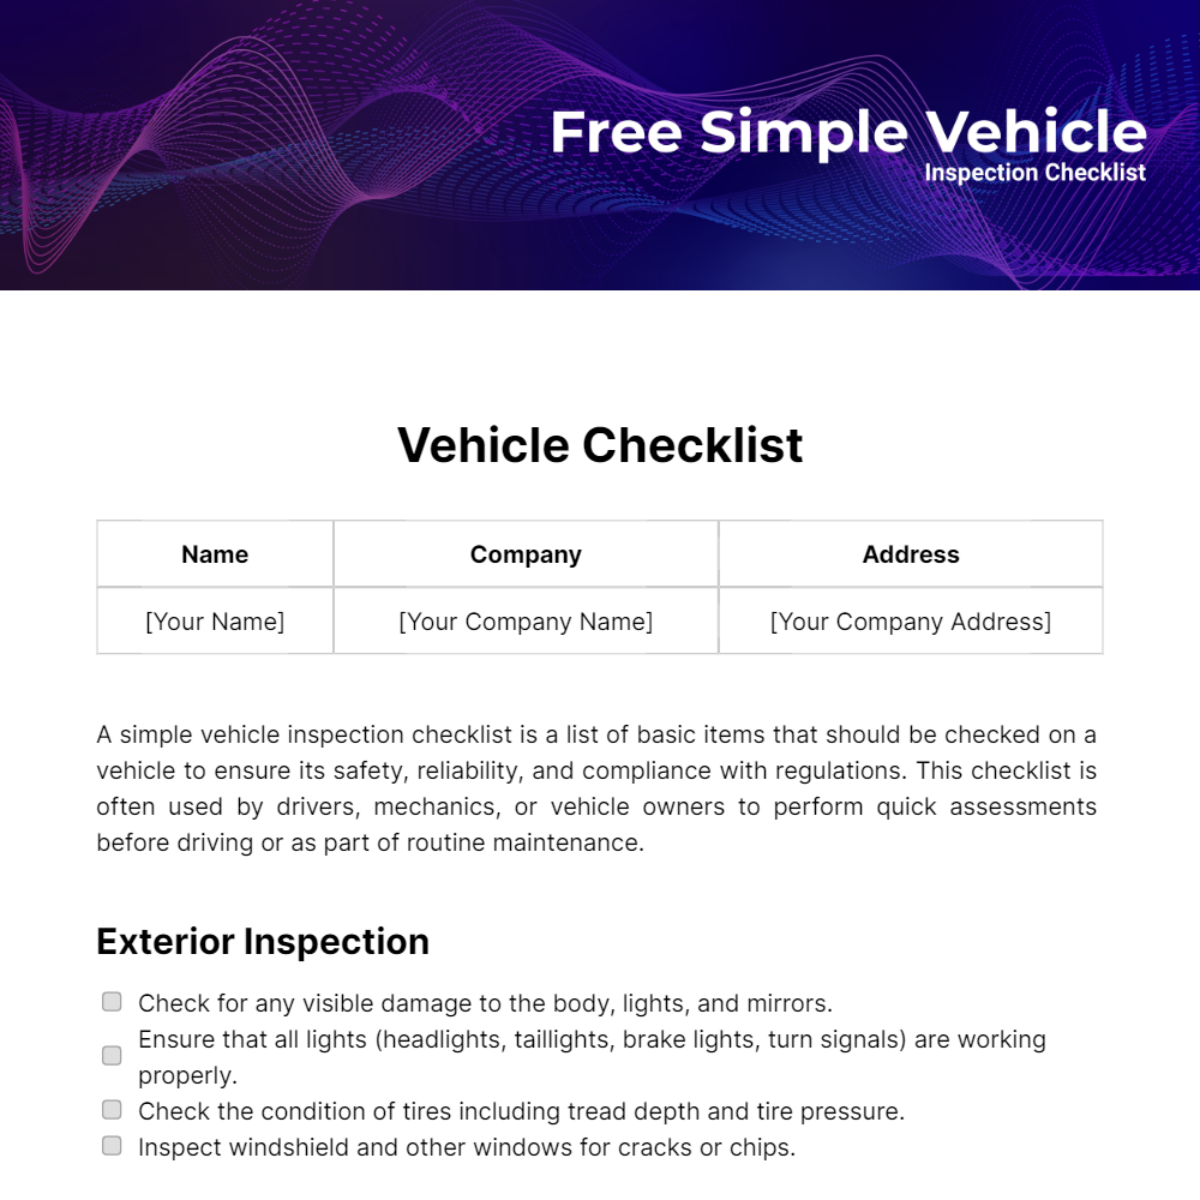 Free Simple Vehicle Inspection Checklist Template